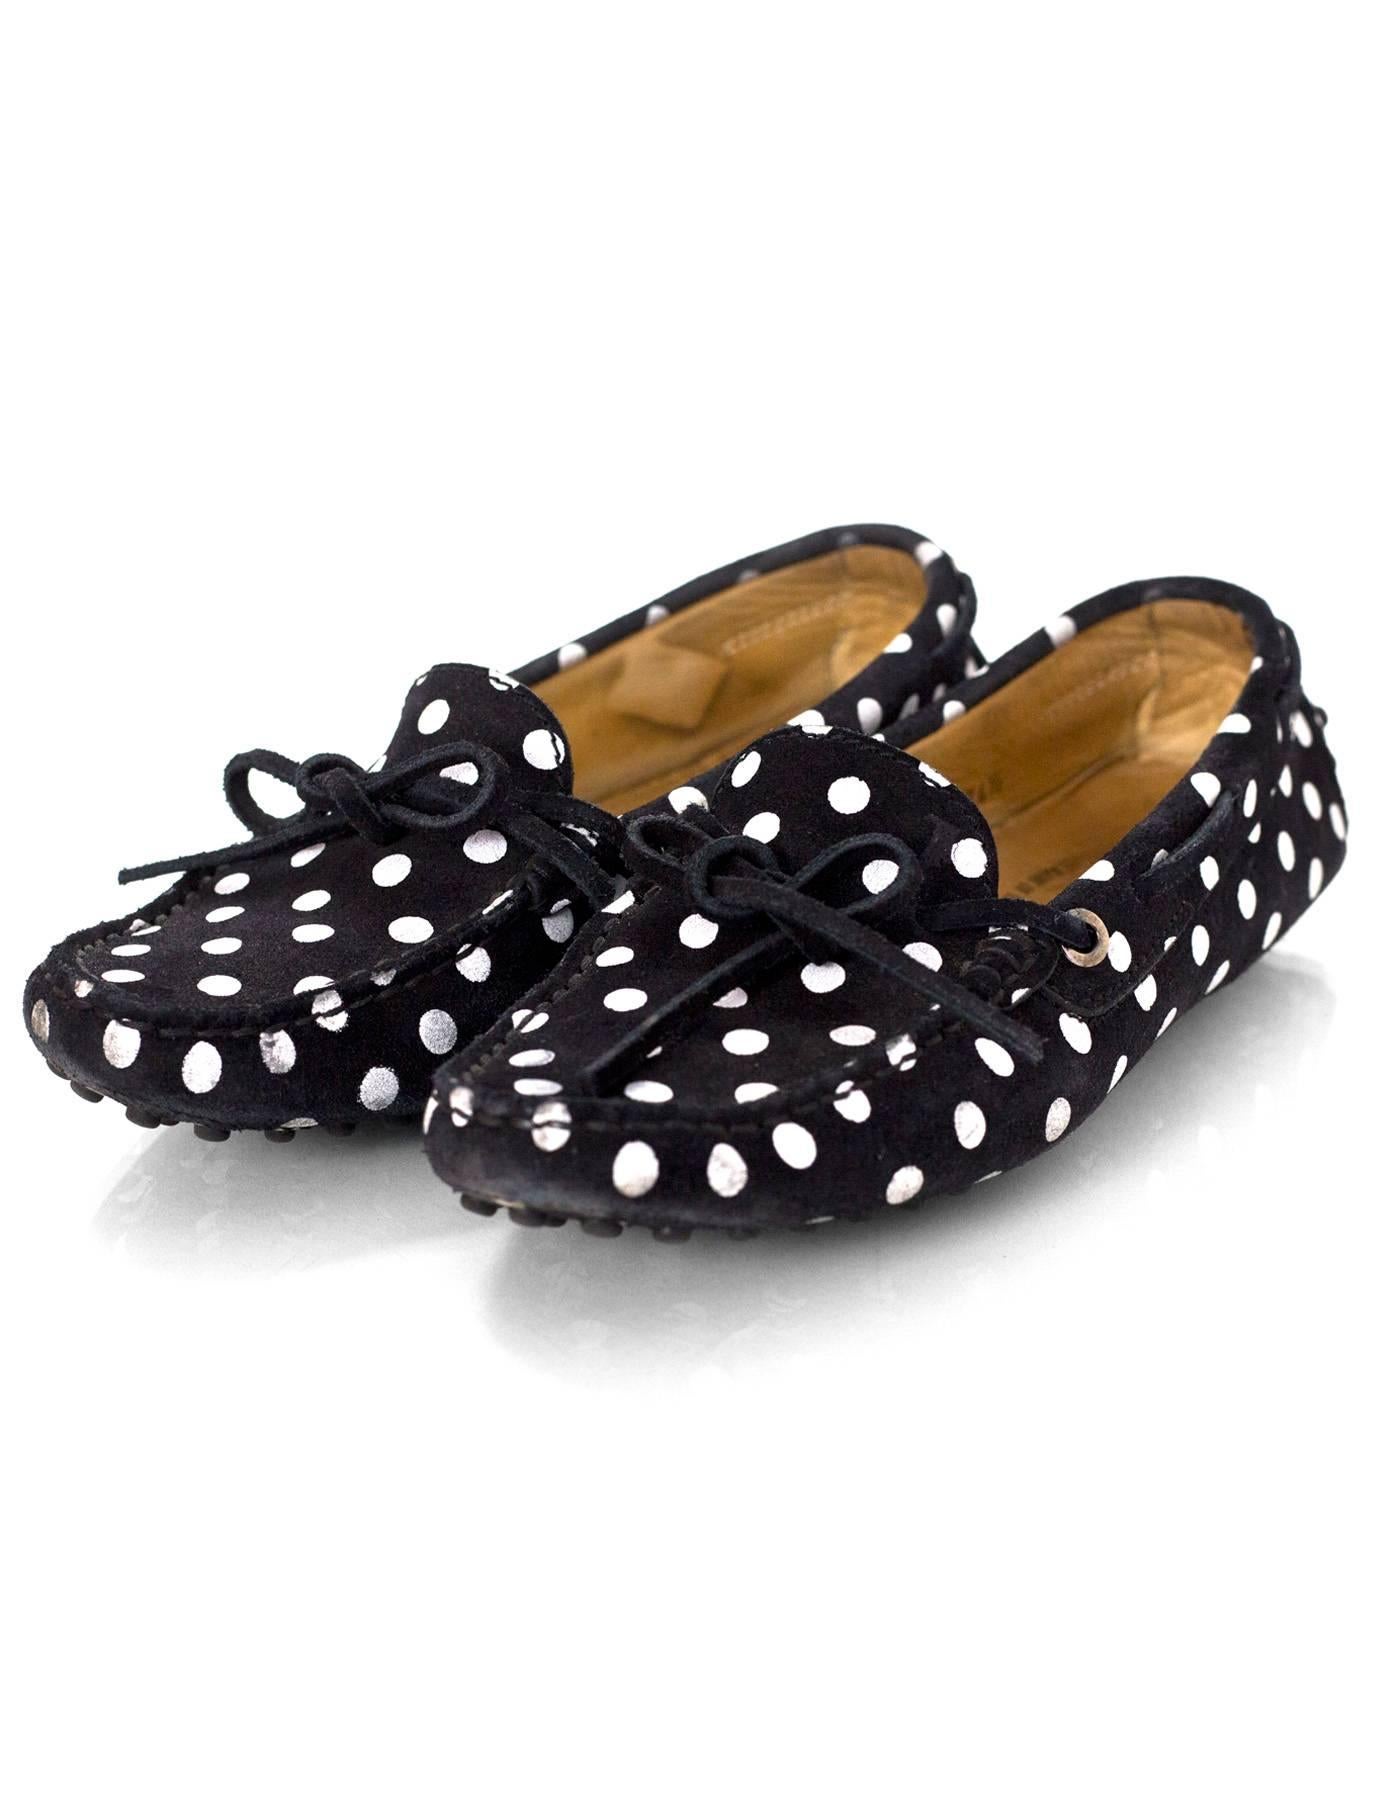 TOD's Black & White Polka Dot Driving Loafers Sz 34.5

Color: Black, white
Materials: Suede
Closure/Opening: Slide on
Sole Stamp: TODS
Overall Condition: Very good pre-owned condition with the exception of moderate wear and soiling throughout